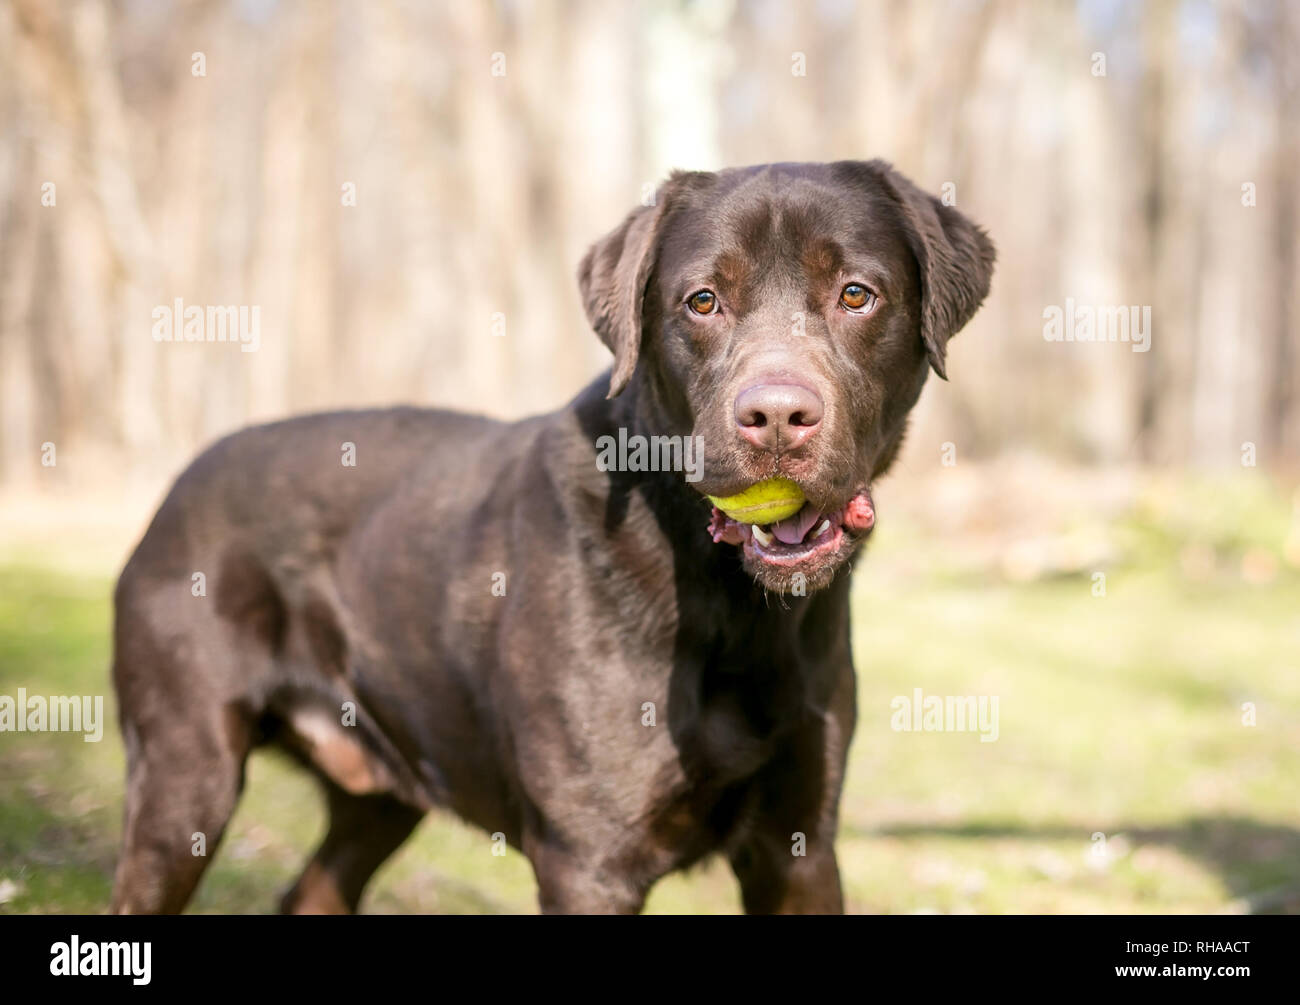 A purebred Chocolate Labrador Retriever dog holding a ball in its mouth Stock Photo